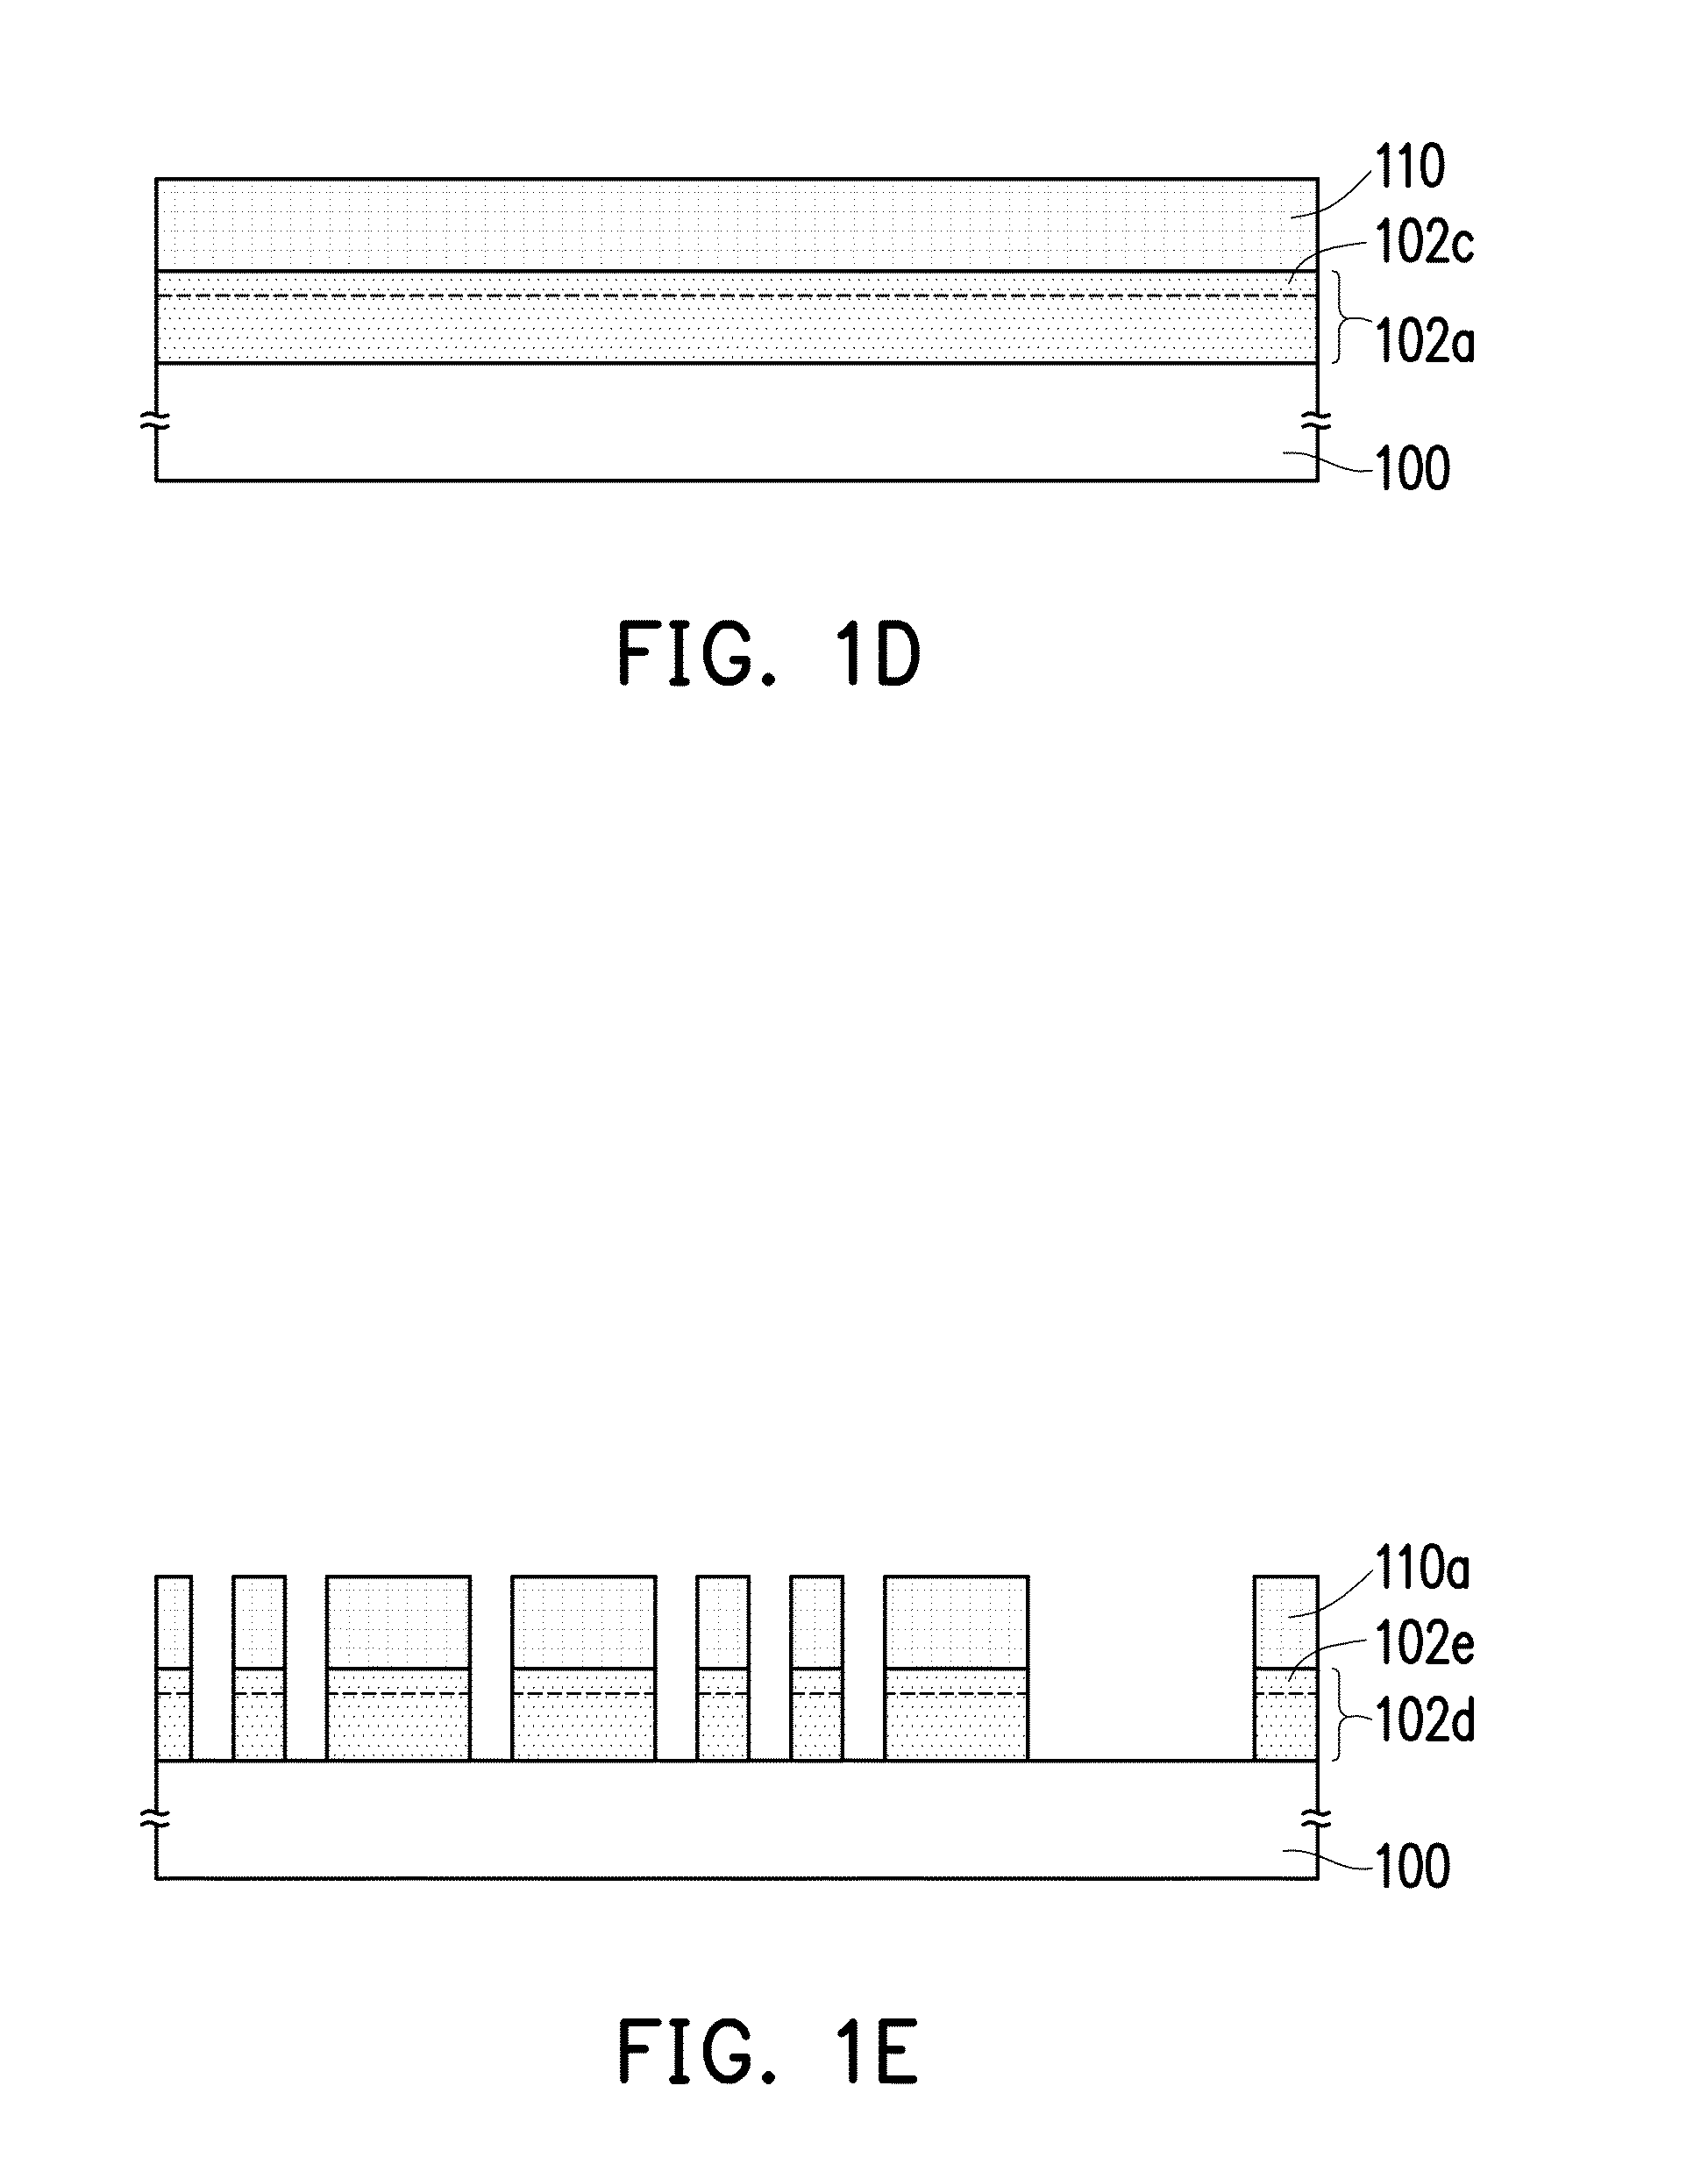 A semiconductor device comprising a surface portion implanted with nitrogen and fluorine